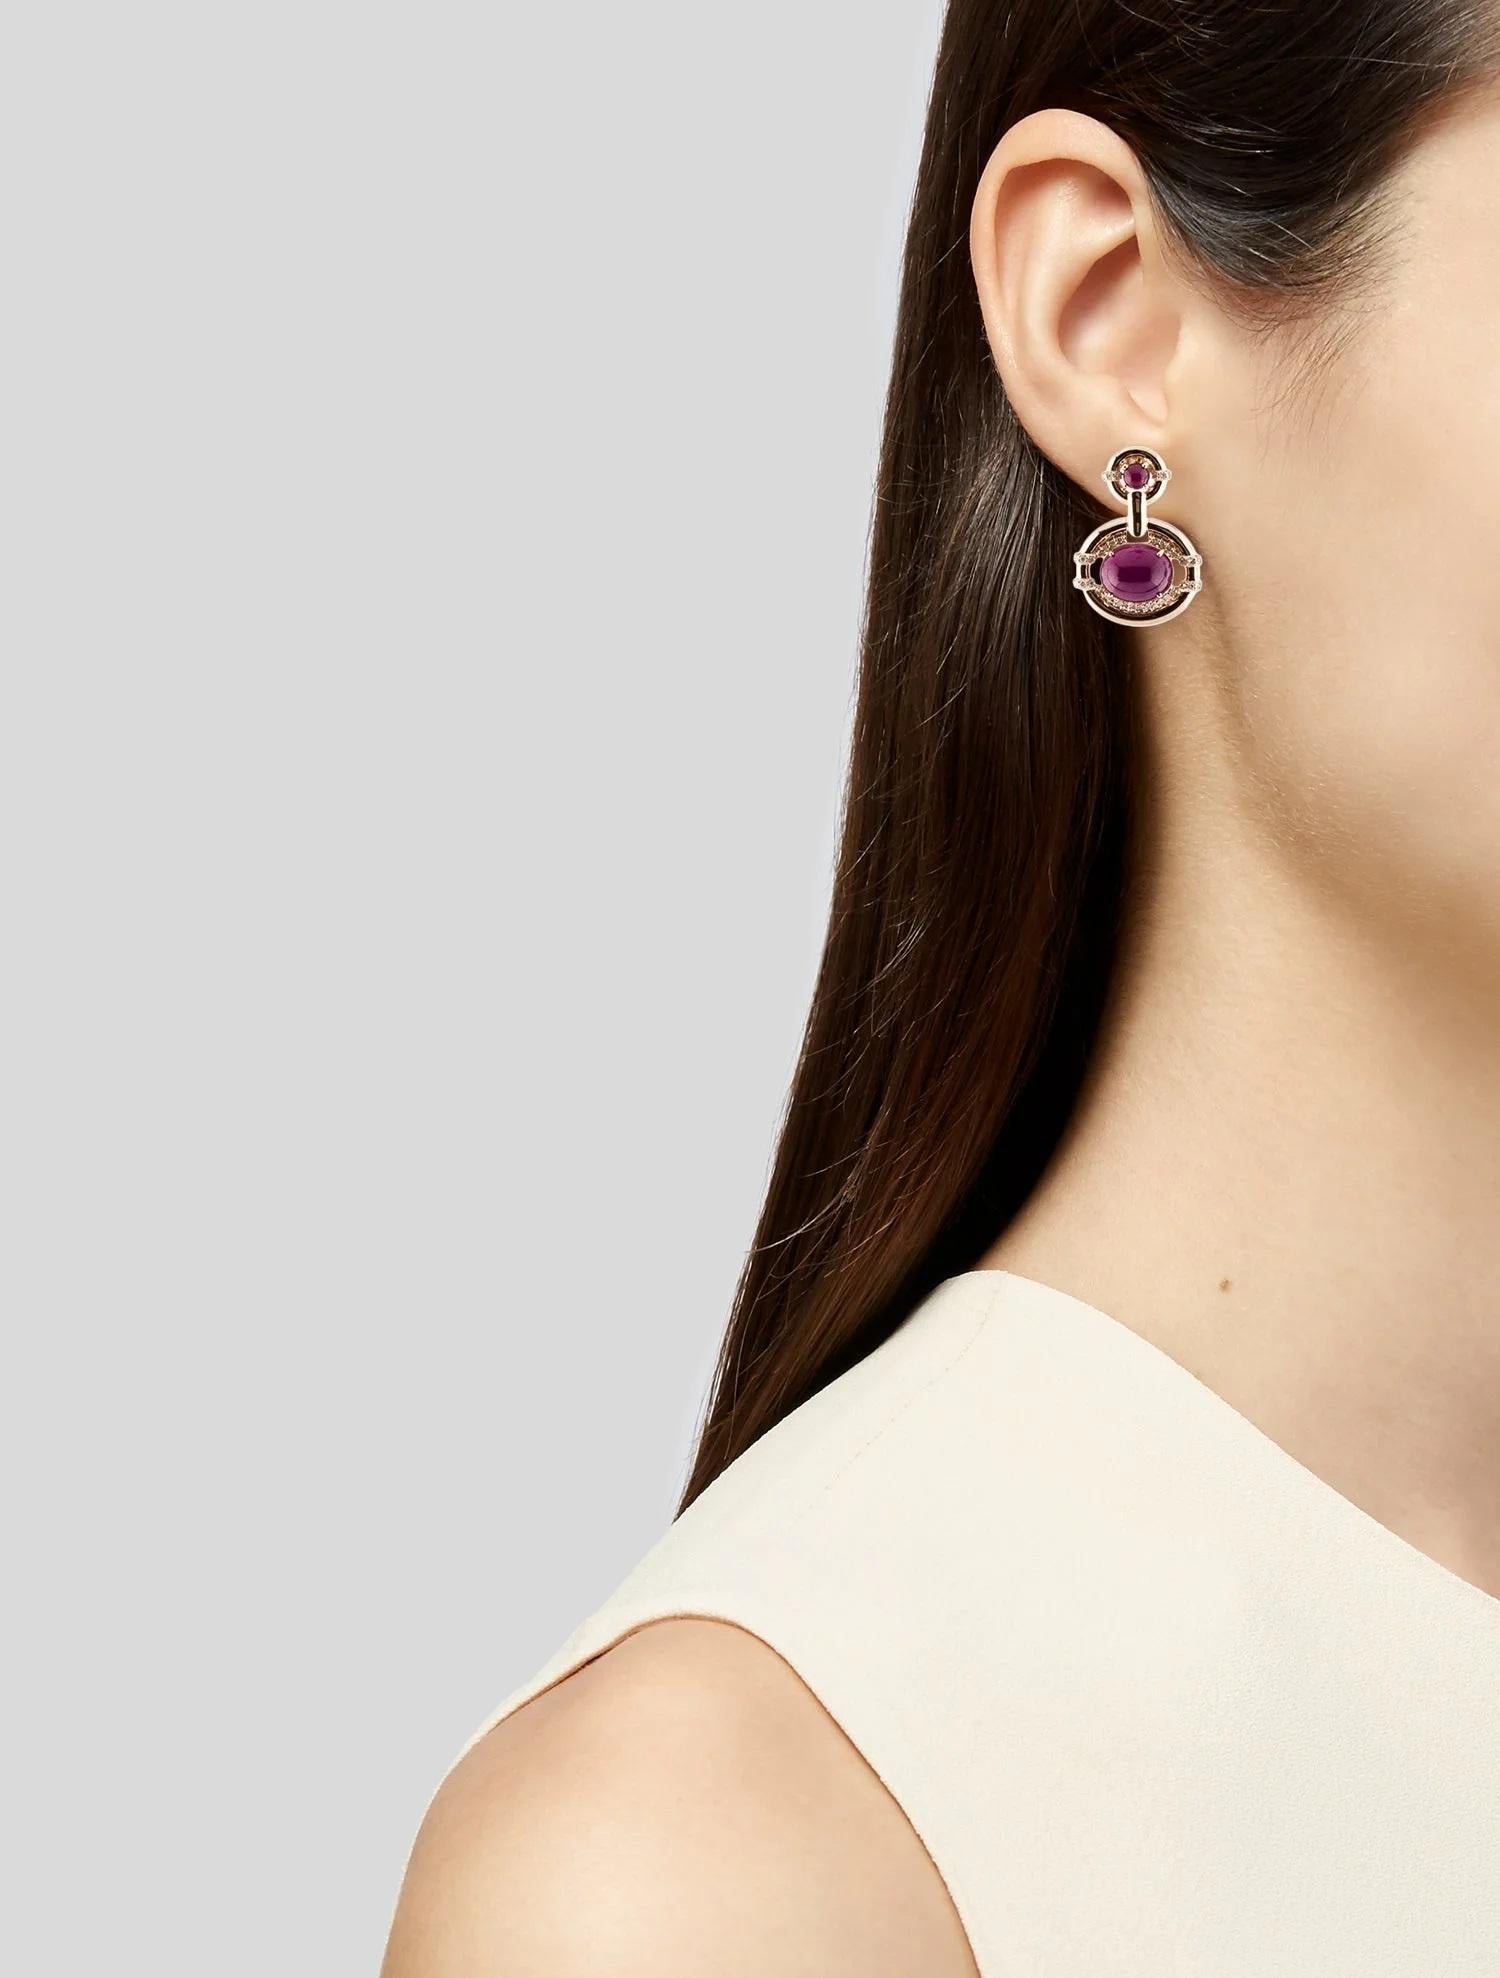 These exquisite 14K yellow gold drop earrings feature a stunning combination of cabochon-cut rubies and brilliant diamonds. The focal point of these earrings is the pair of 0.78 carat round ruby cabochons, set prominently to catch the eye.